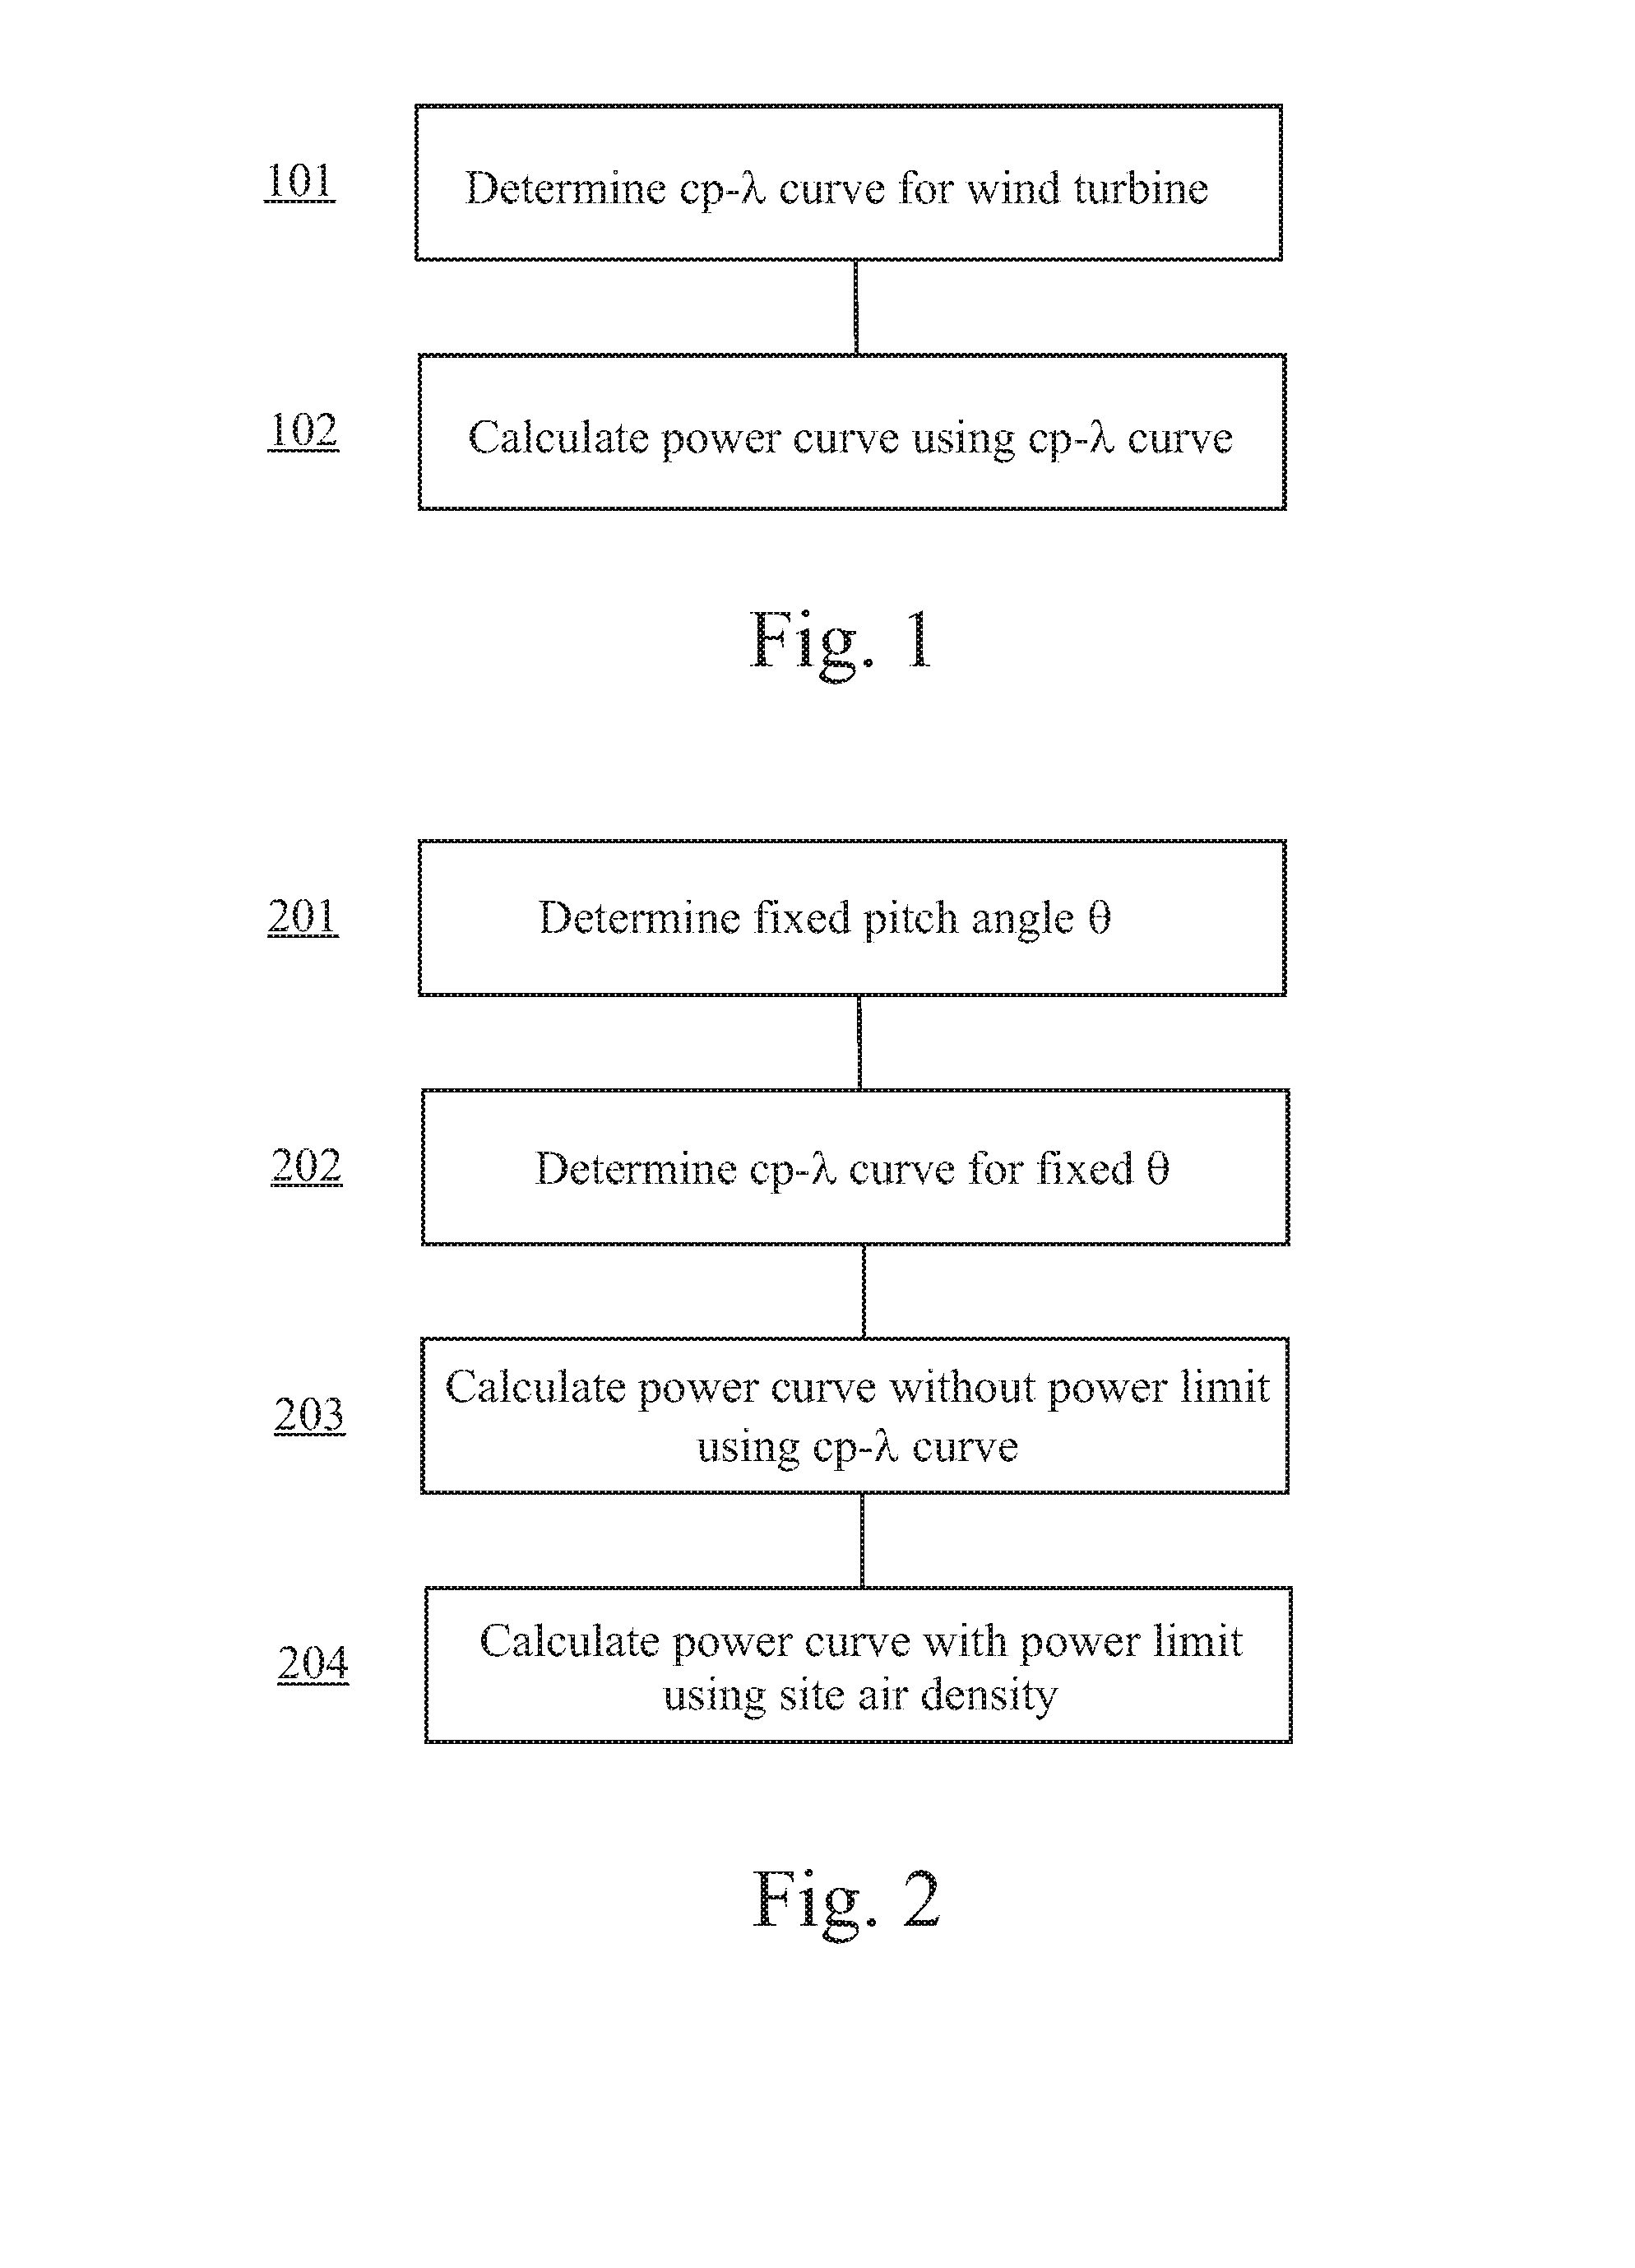 Method for predicting a power curve for a wind turbine